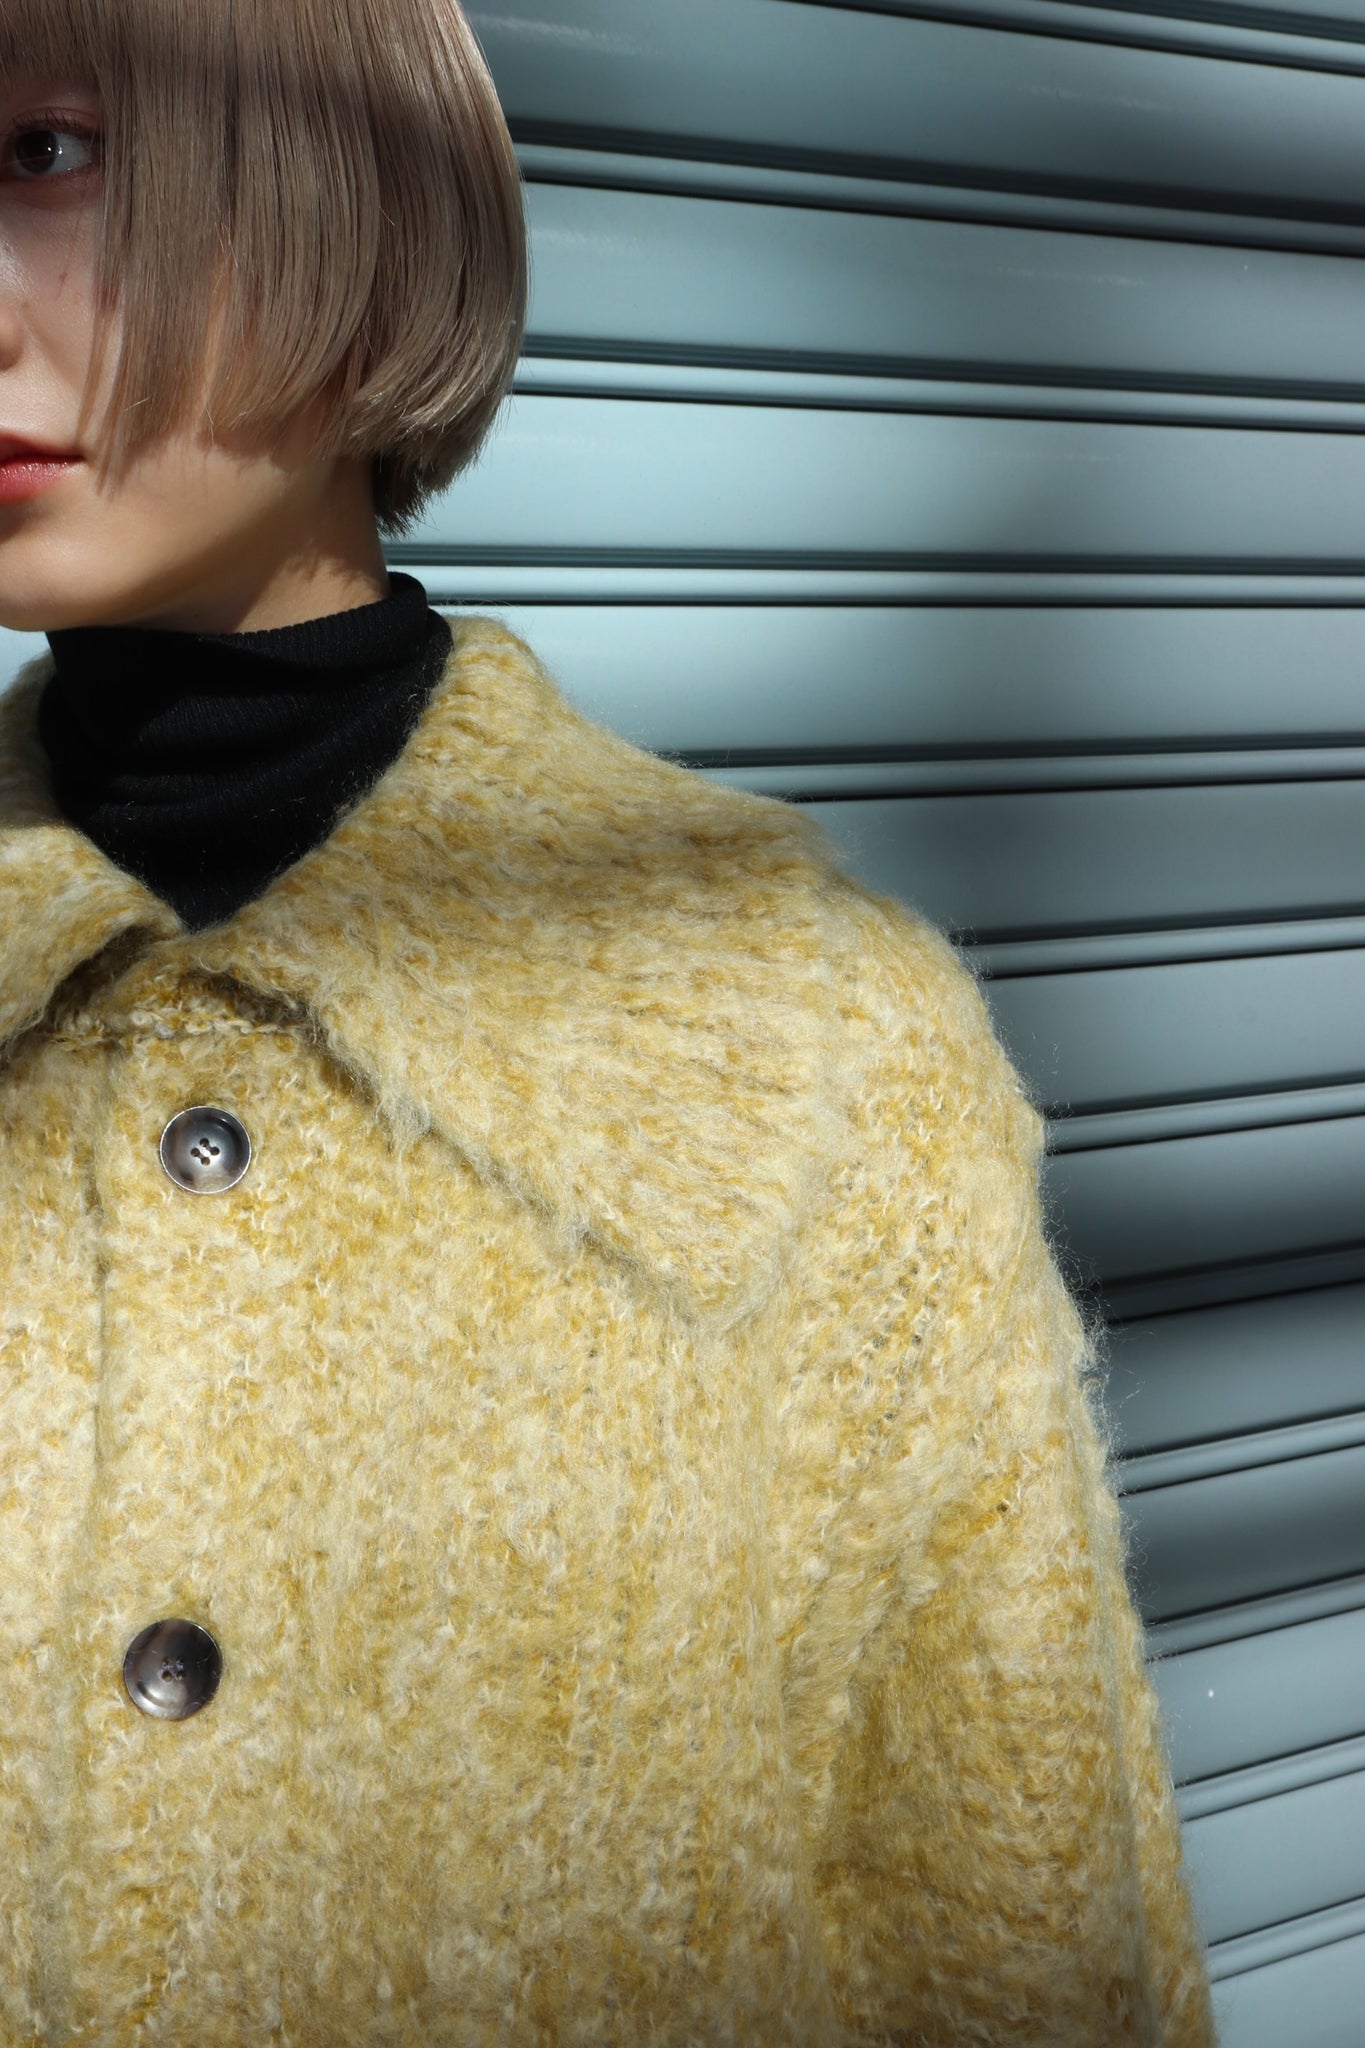 Wearing image of CREAM of Teddy Knit COAT of 22AW of PerverZe